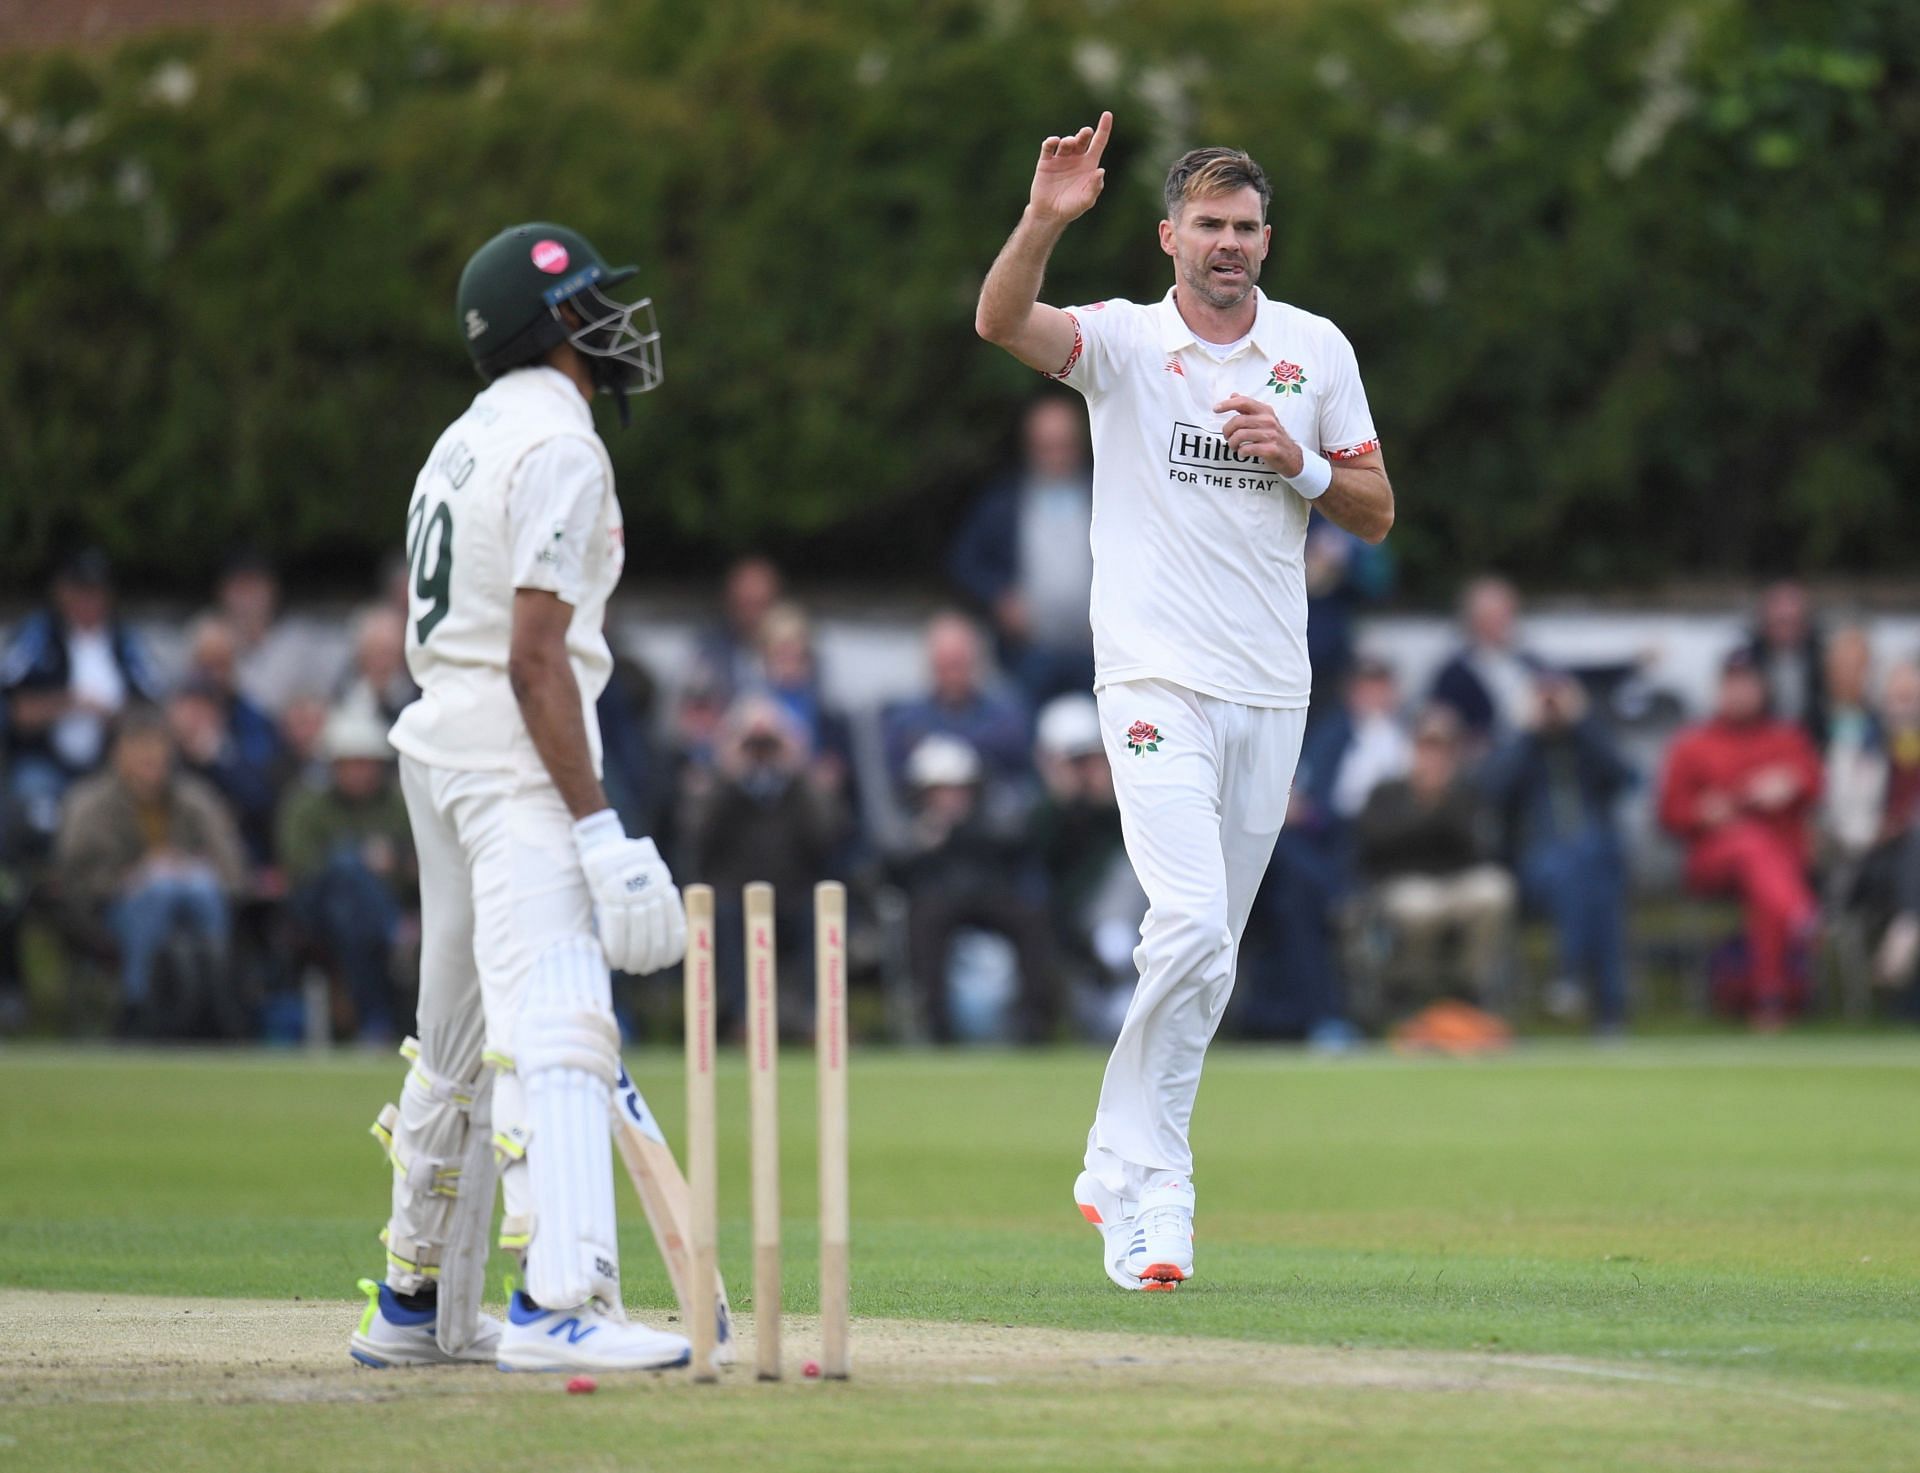 [Watch] James Anderson takes a fifer for Lancashire in County Championship fixture against Nottinghamshire